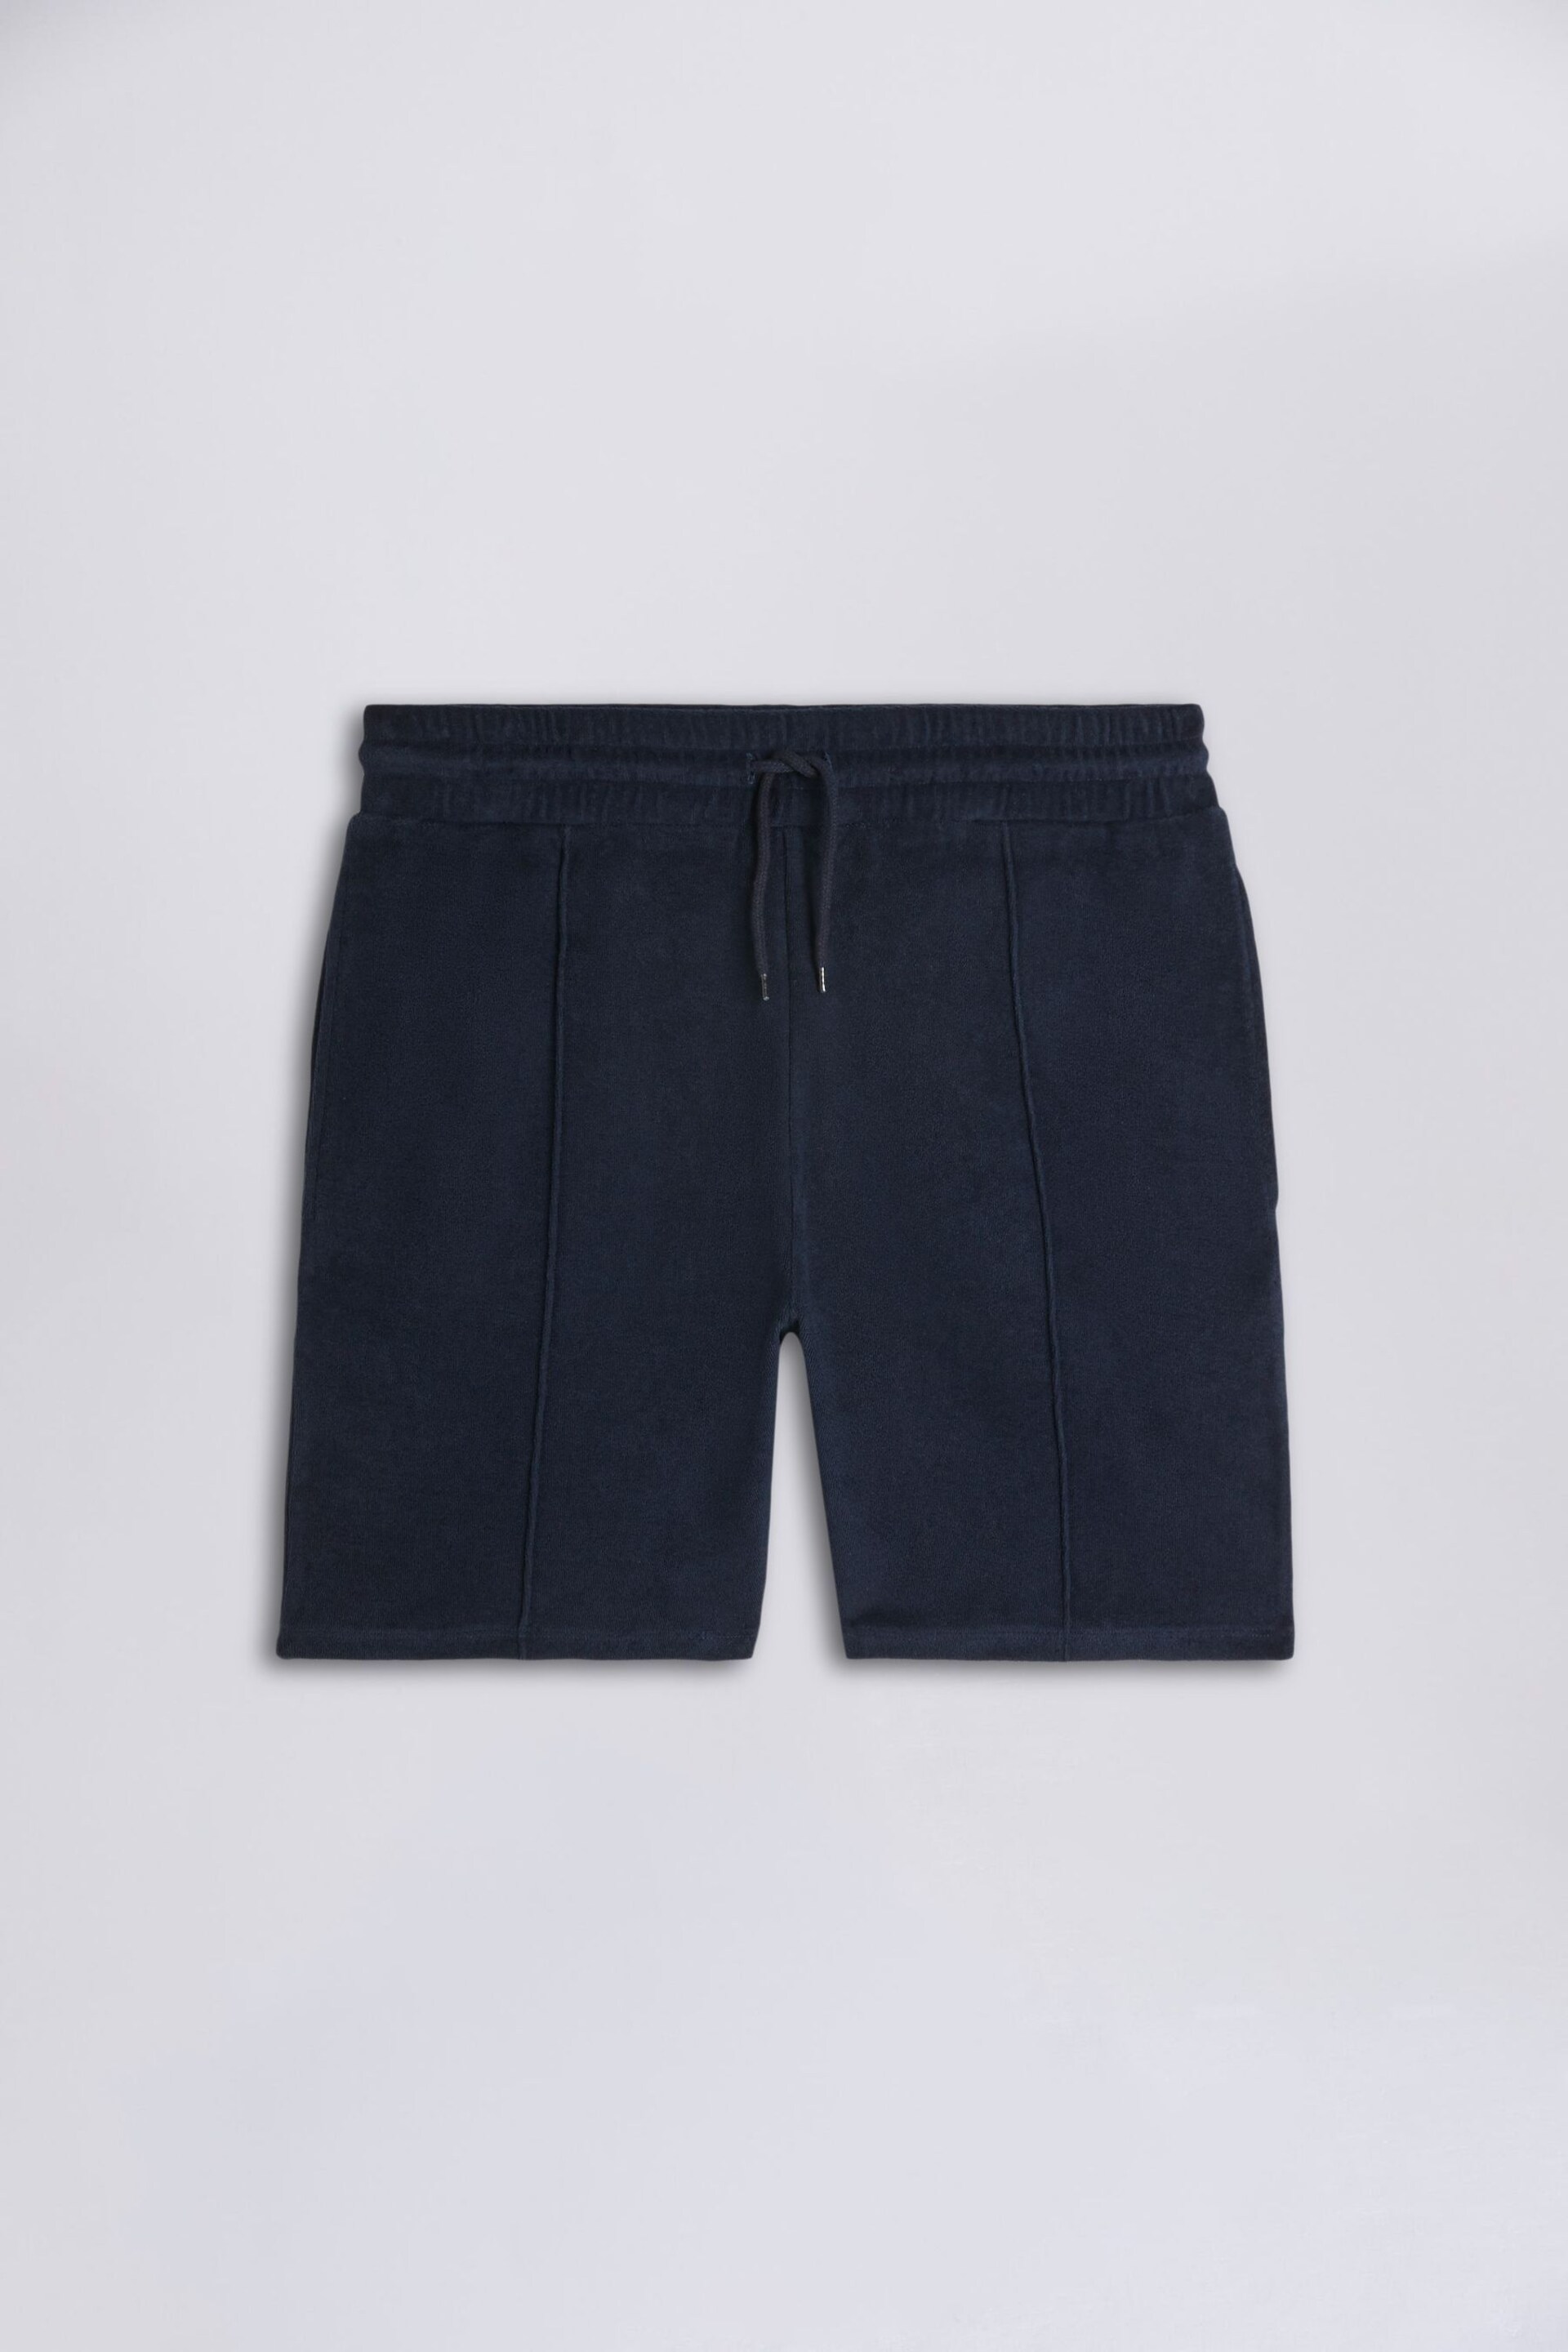 MOSS Blue Terry Towelling Shorts - Image 4 of 4